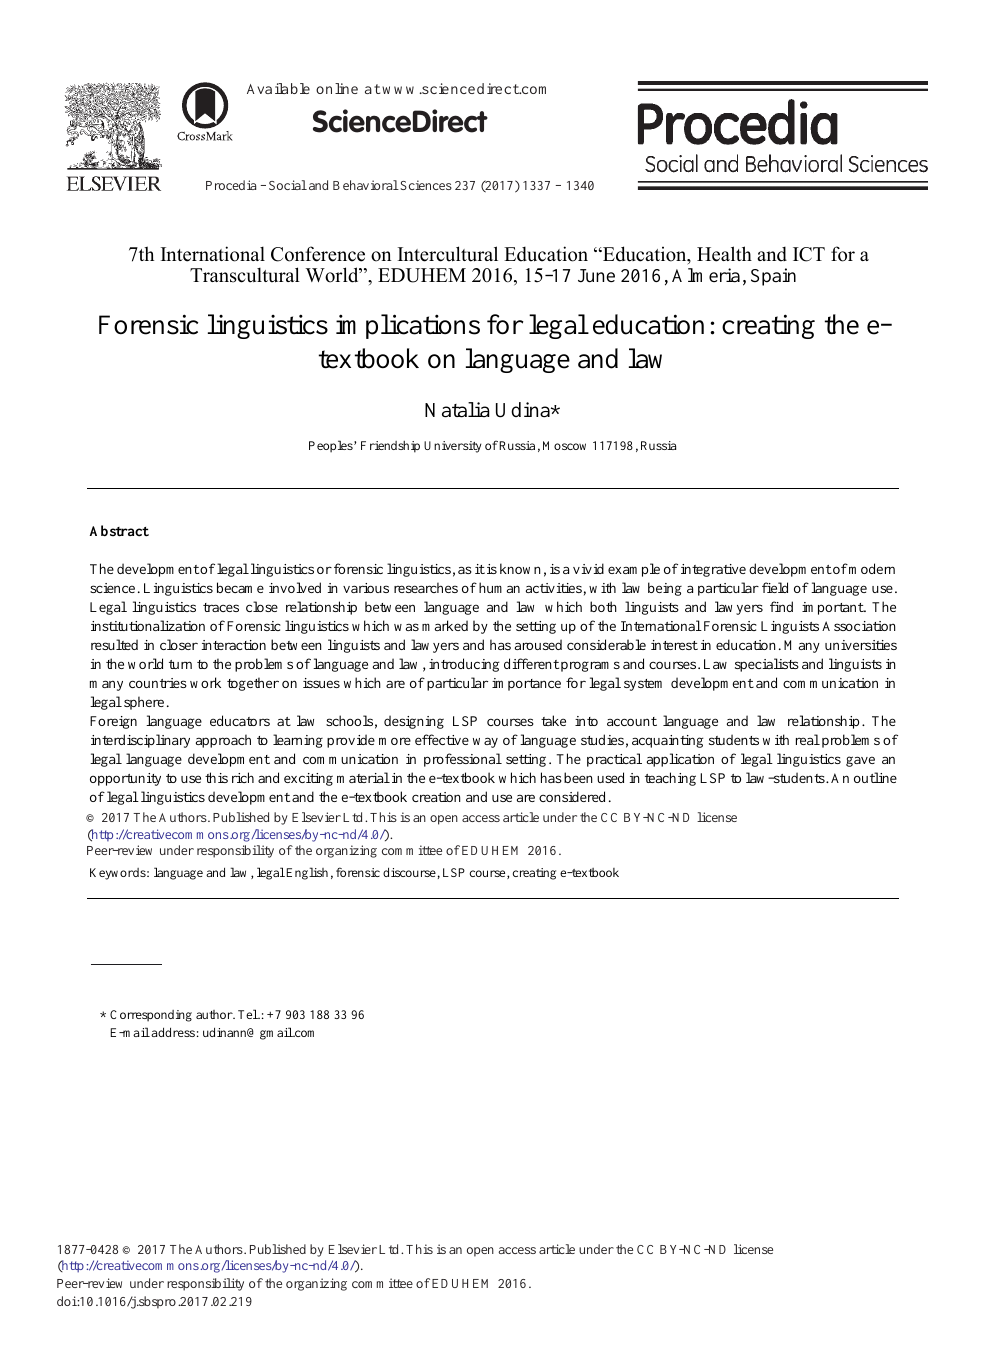 Forensic Linguistics Implications for Legal Education: Creating